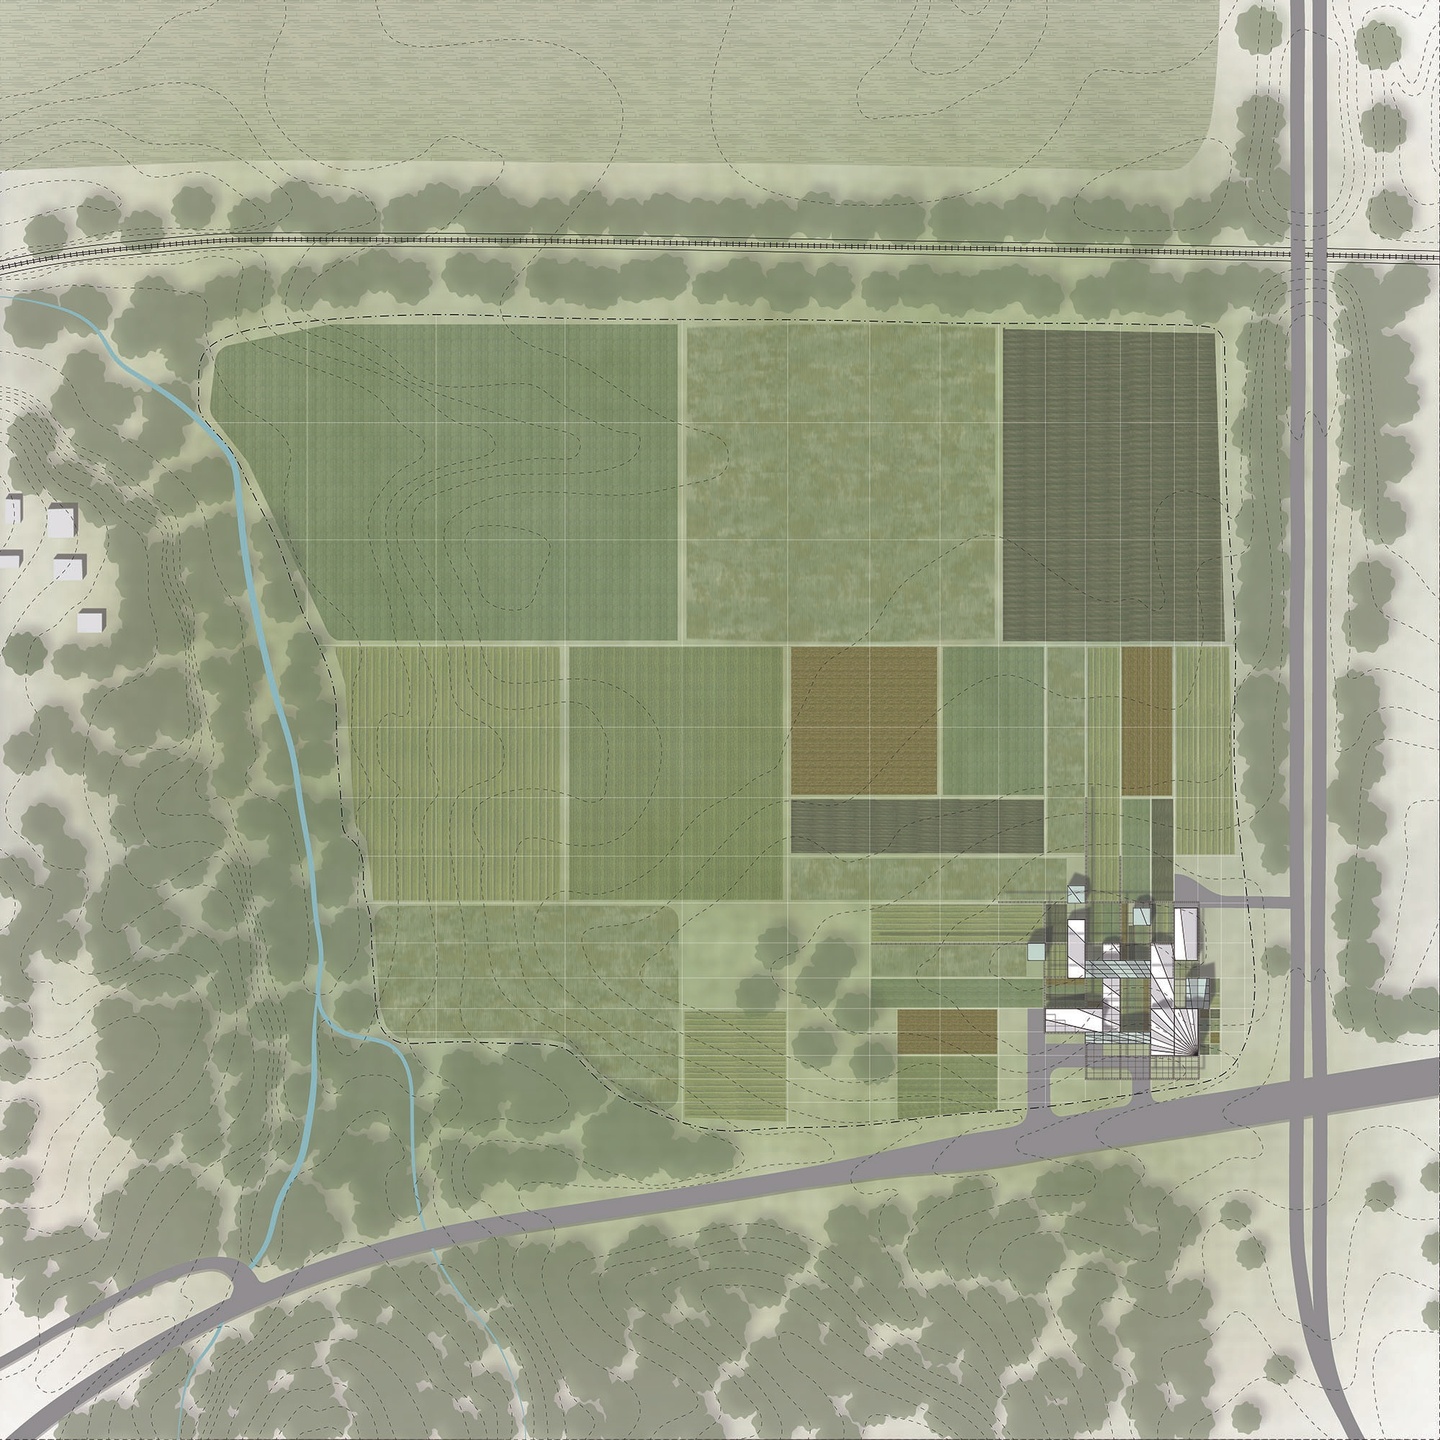 Computer rendering of a site plan of agricultural land with an orthagonal building complex on the corner of two roads with an overlay of linework including site topography.